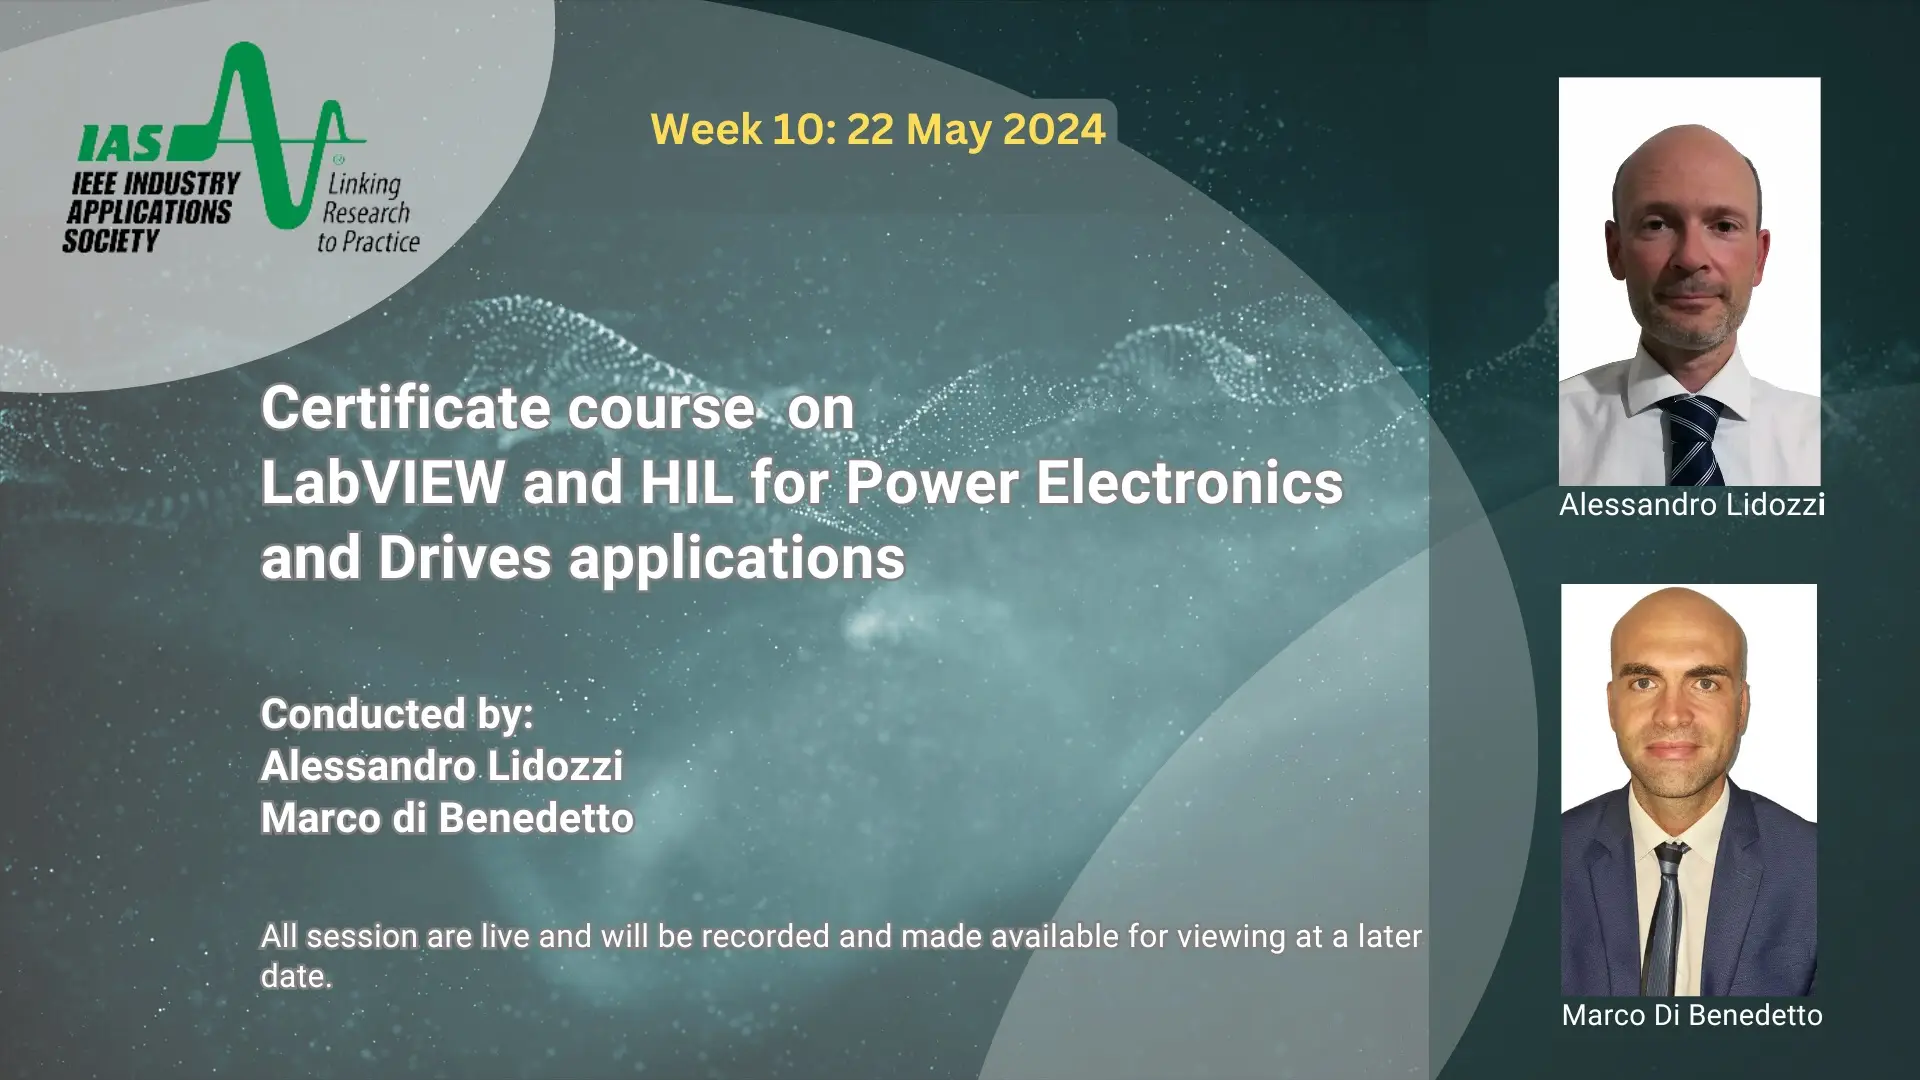 Week 10: Certificate Course on LabVIEW and HIL for Power Electronics and Drives Applications